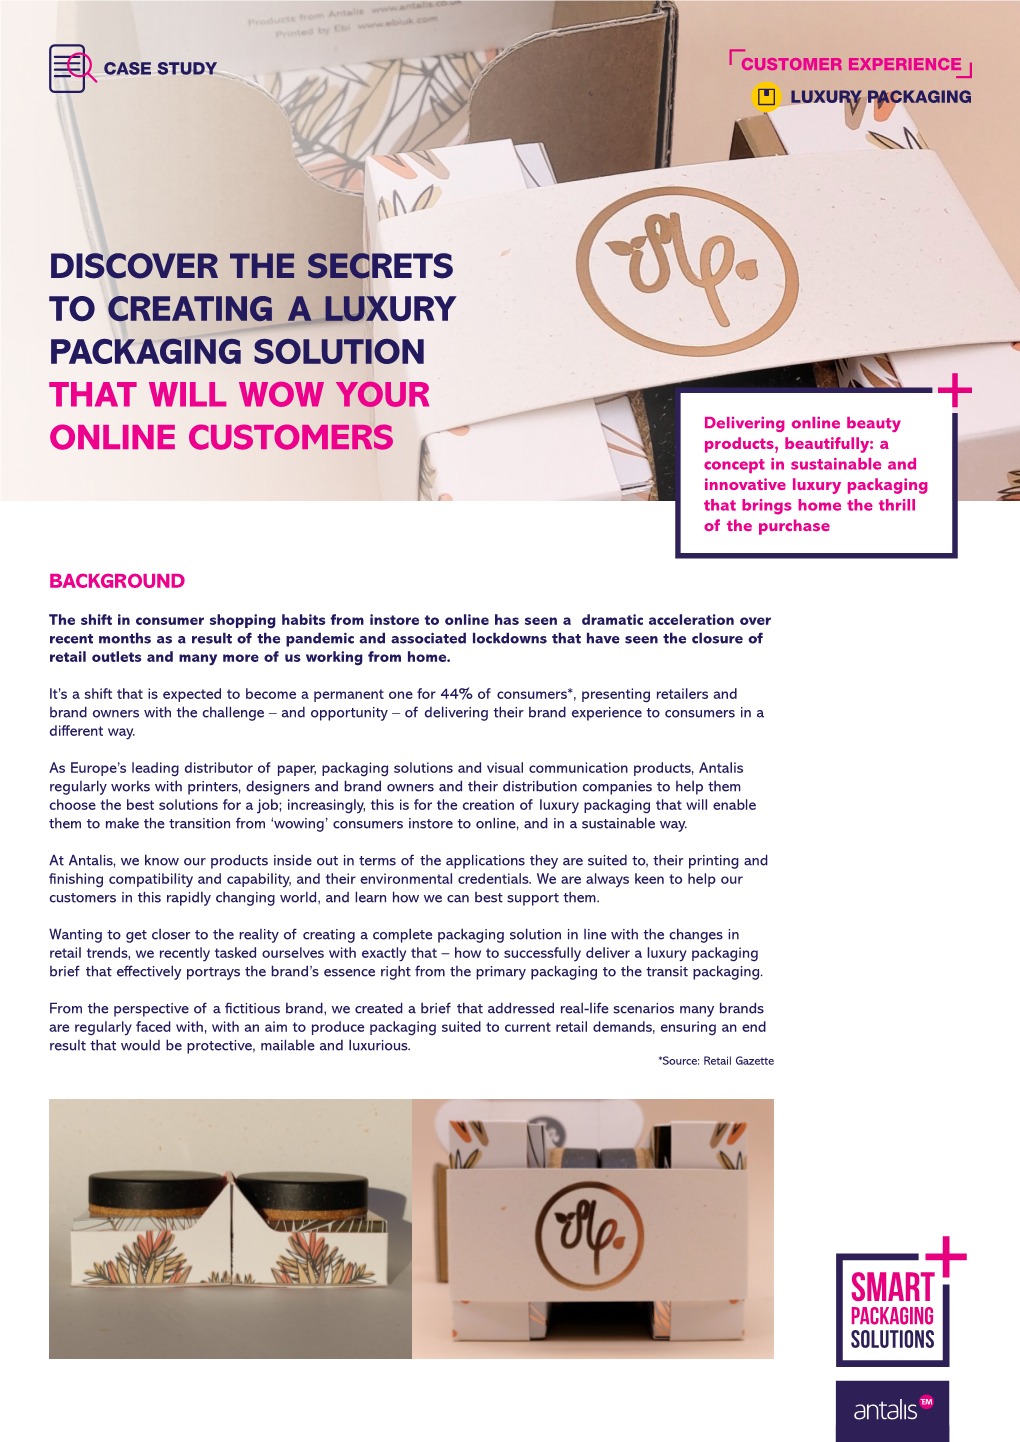 Discover the Secrets to Creating a Luxury Packaging Solution That Will Wow Your Online Customers